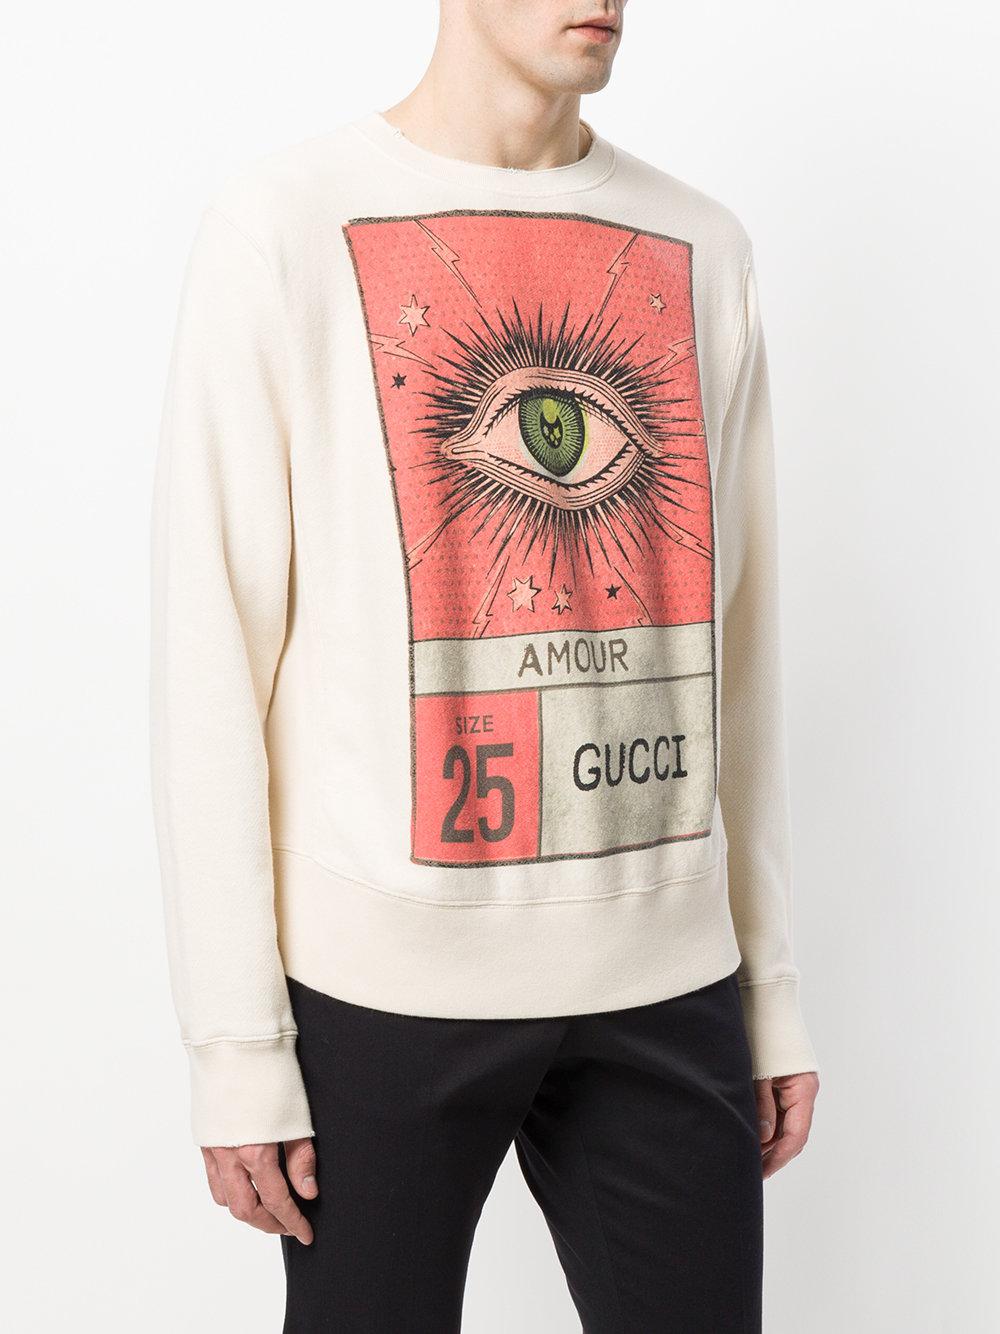 Gucci Off White Amour Eye Printed Cotton T Shirt L for Men - Lyst